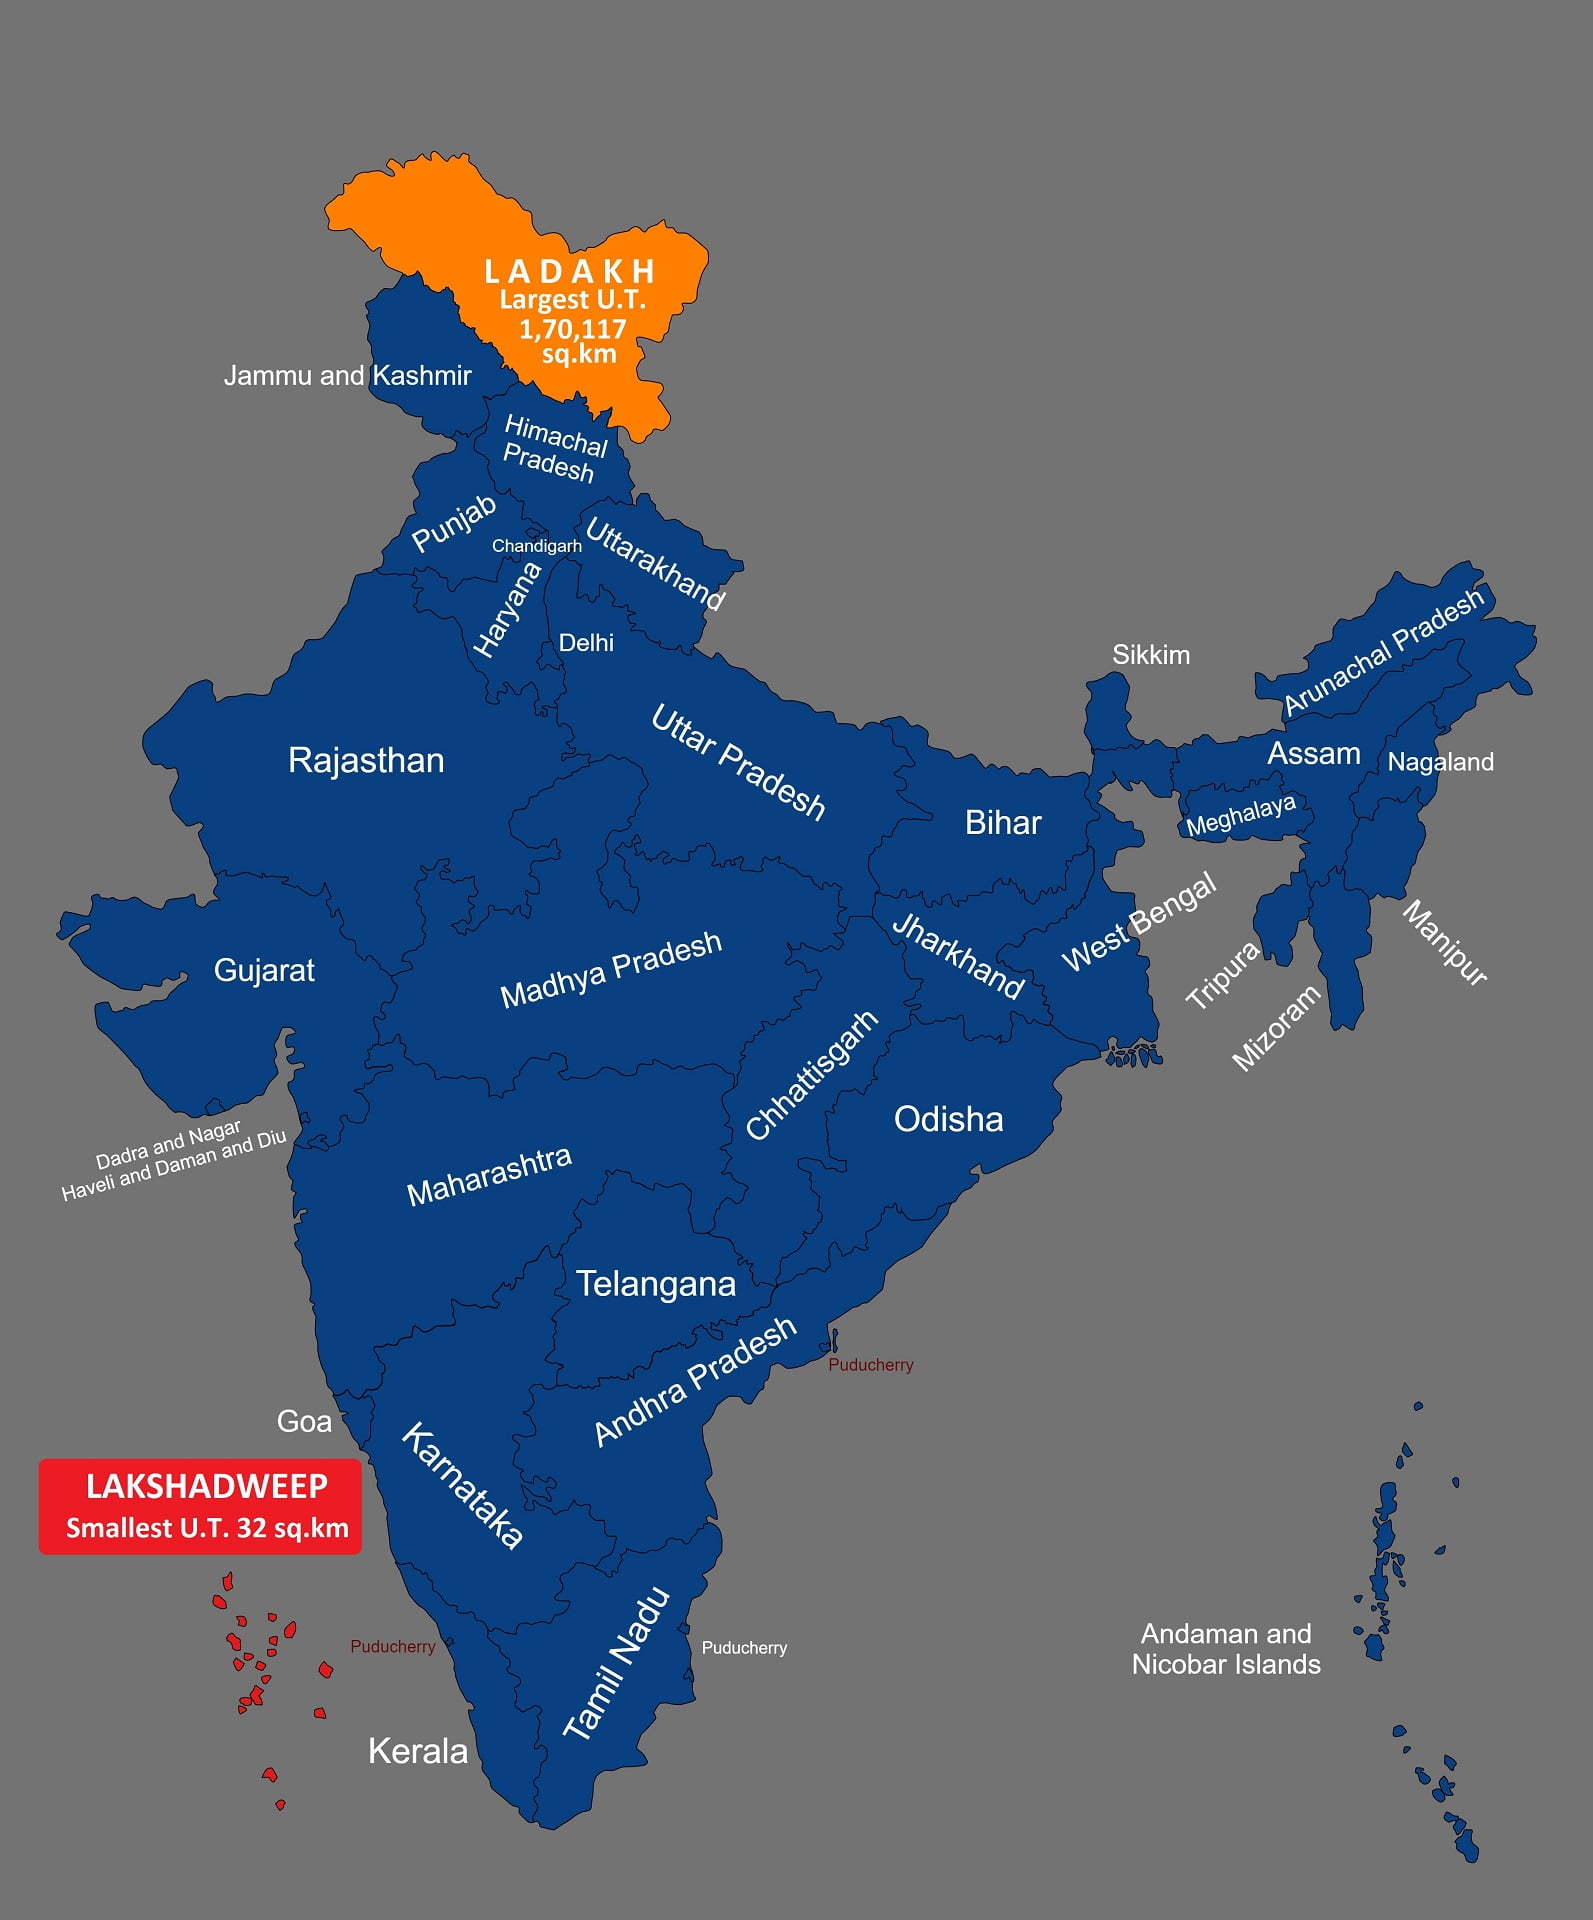 List of the Largest to Smallest Union Territories of India in terms of Area